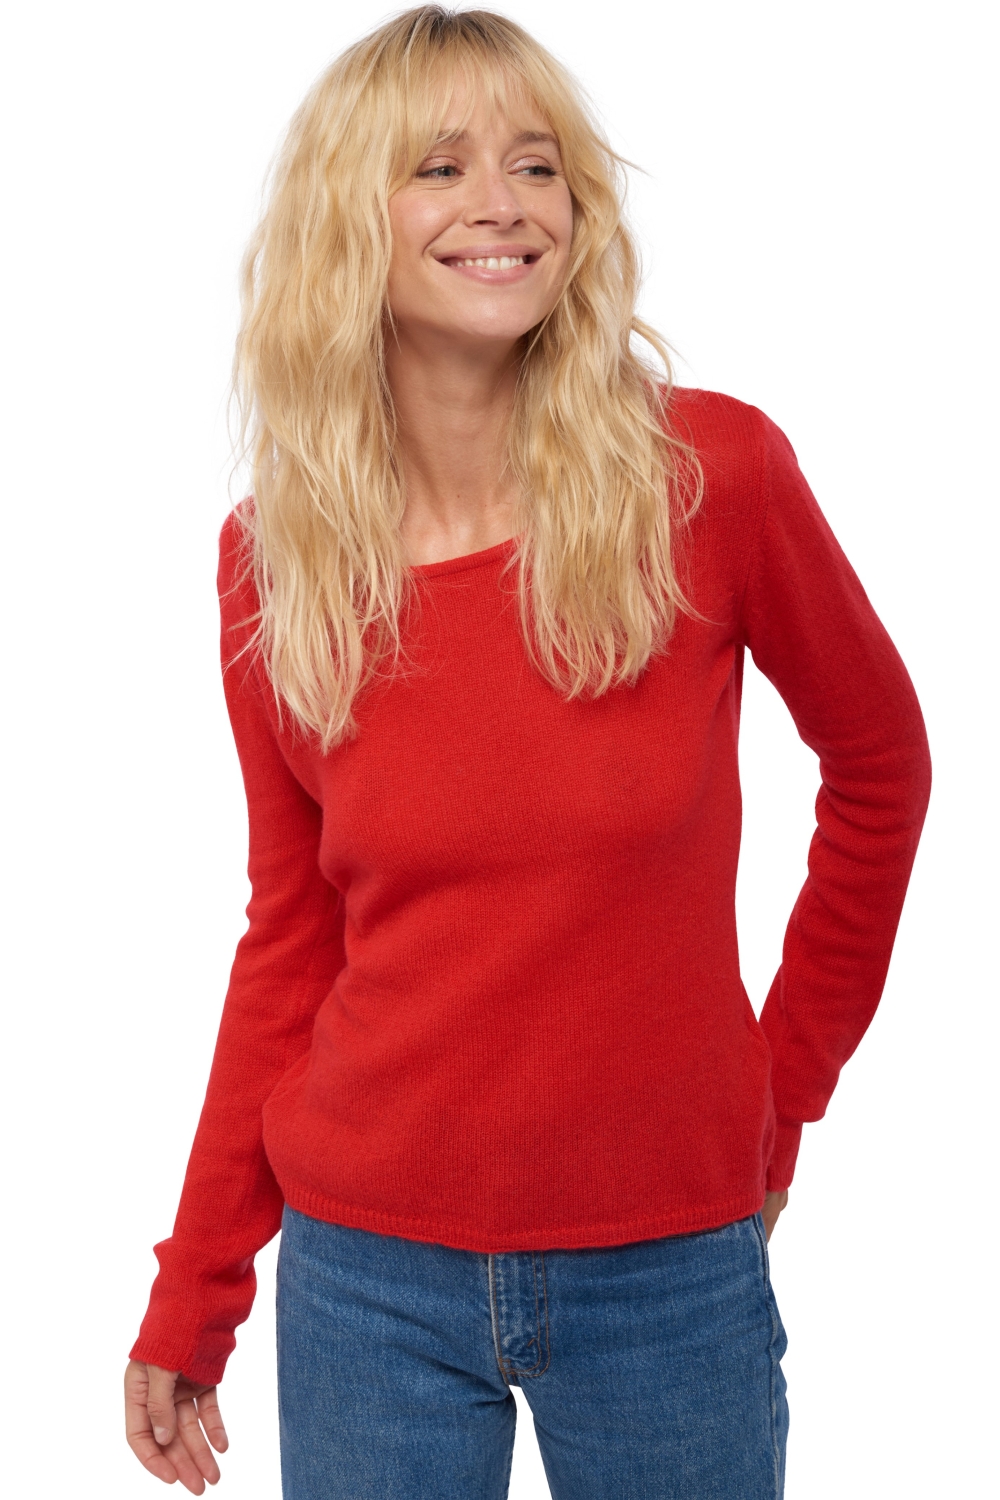 Cashmere ladies basic sweaters at low prices caleen rouge xl